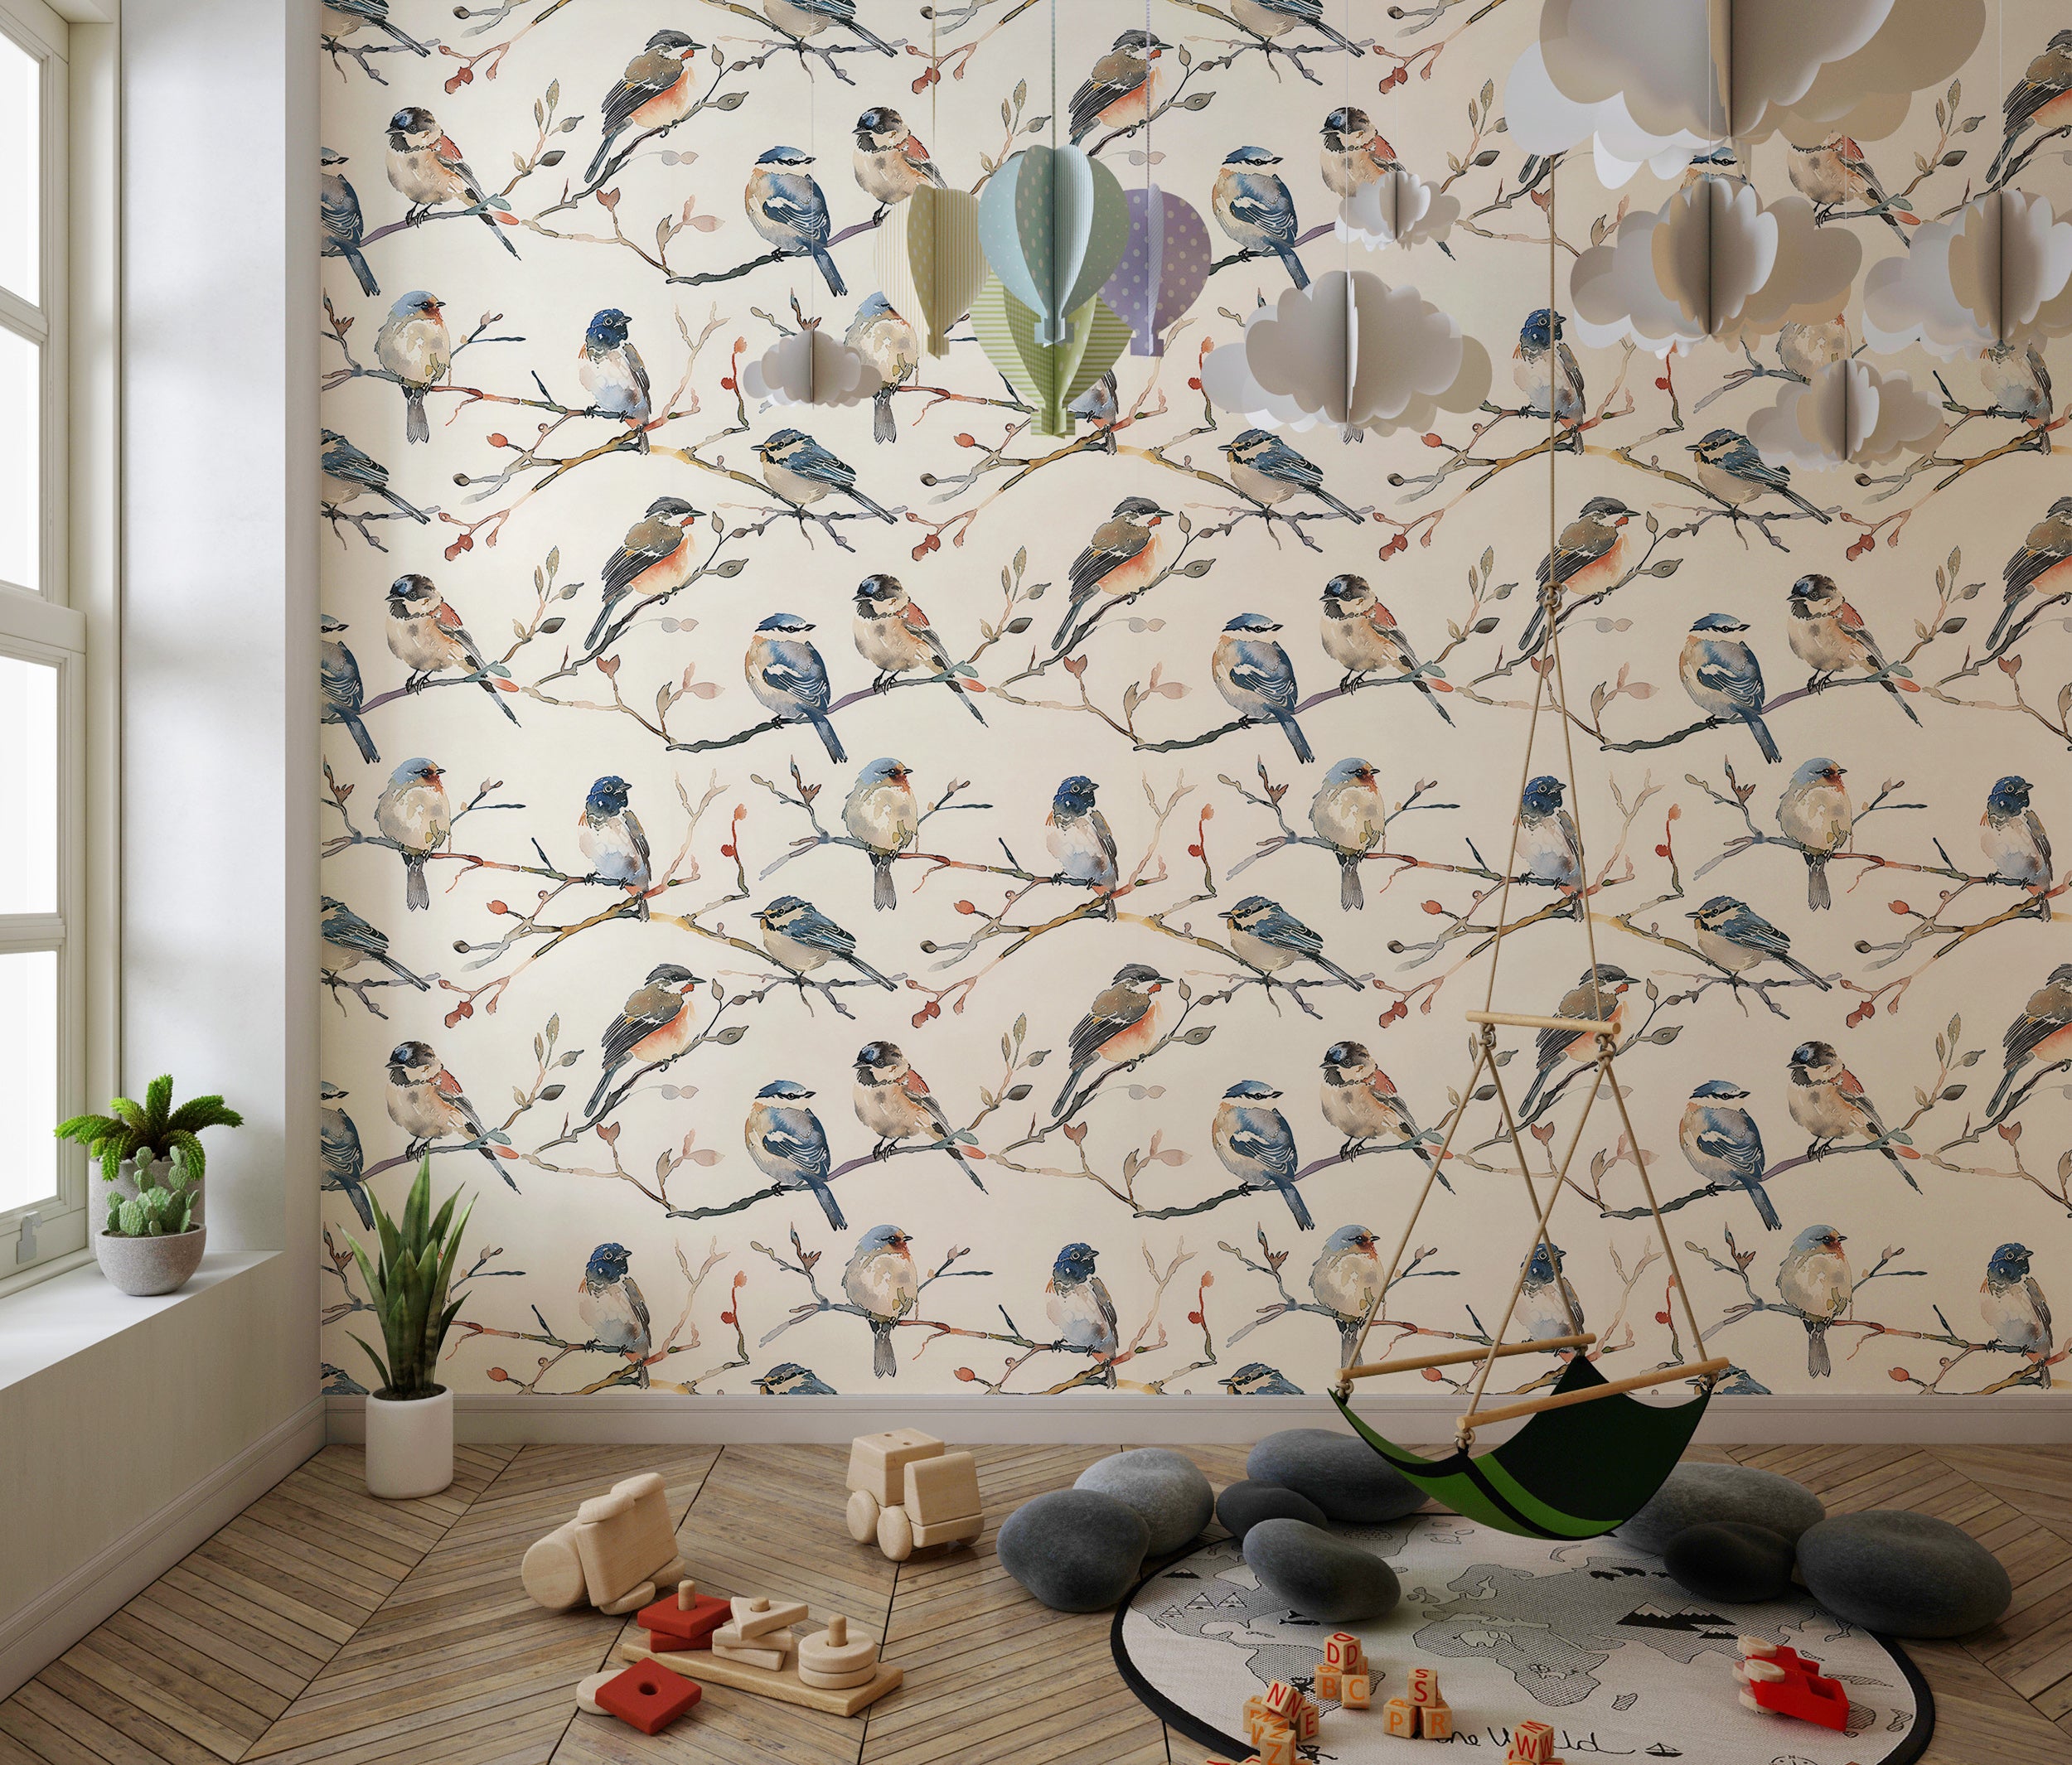 Peaceful Birds on Branches Wall Decor